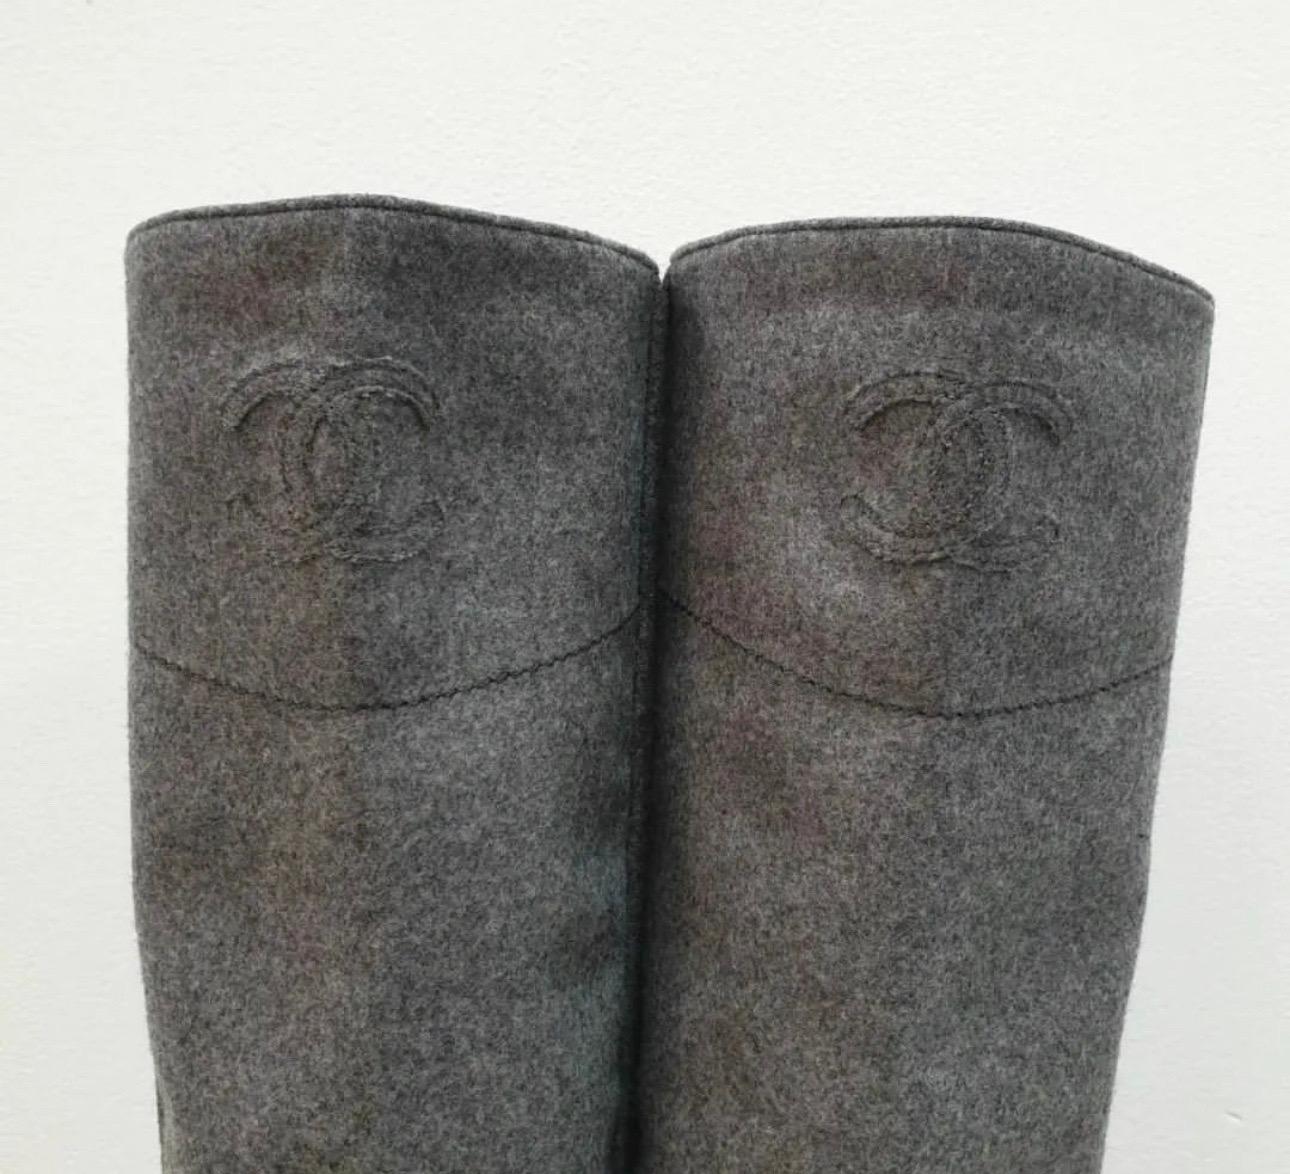 Gray knit riding boots with embroidered CC logo detail. Do not come with dust bag or box

Size: 39

Very good condition. No box. No dust bag.